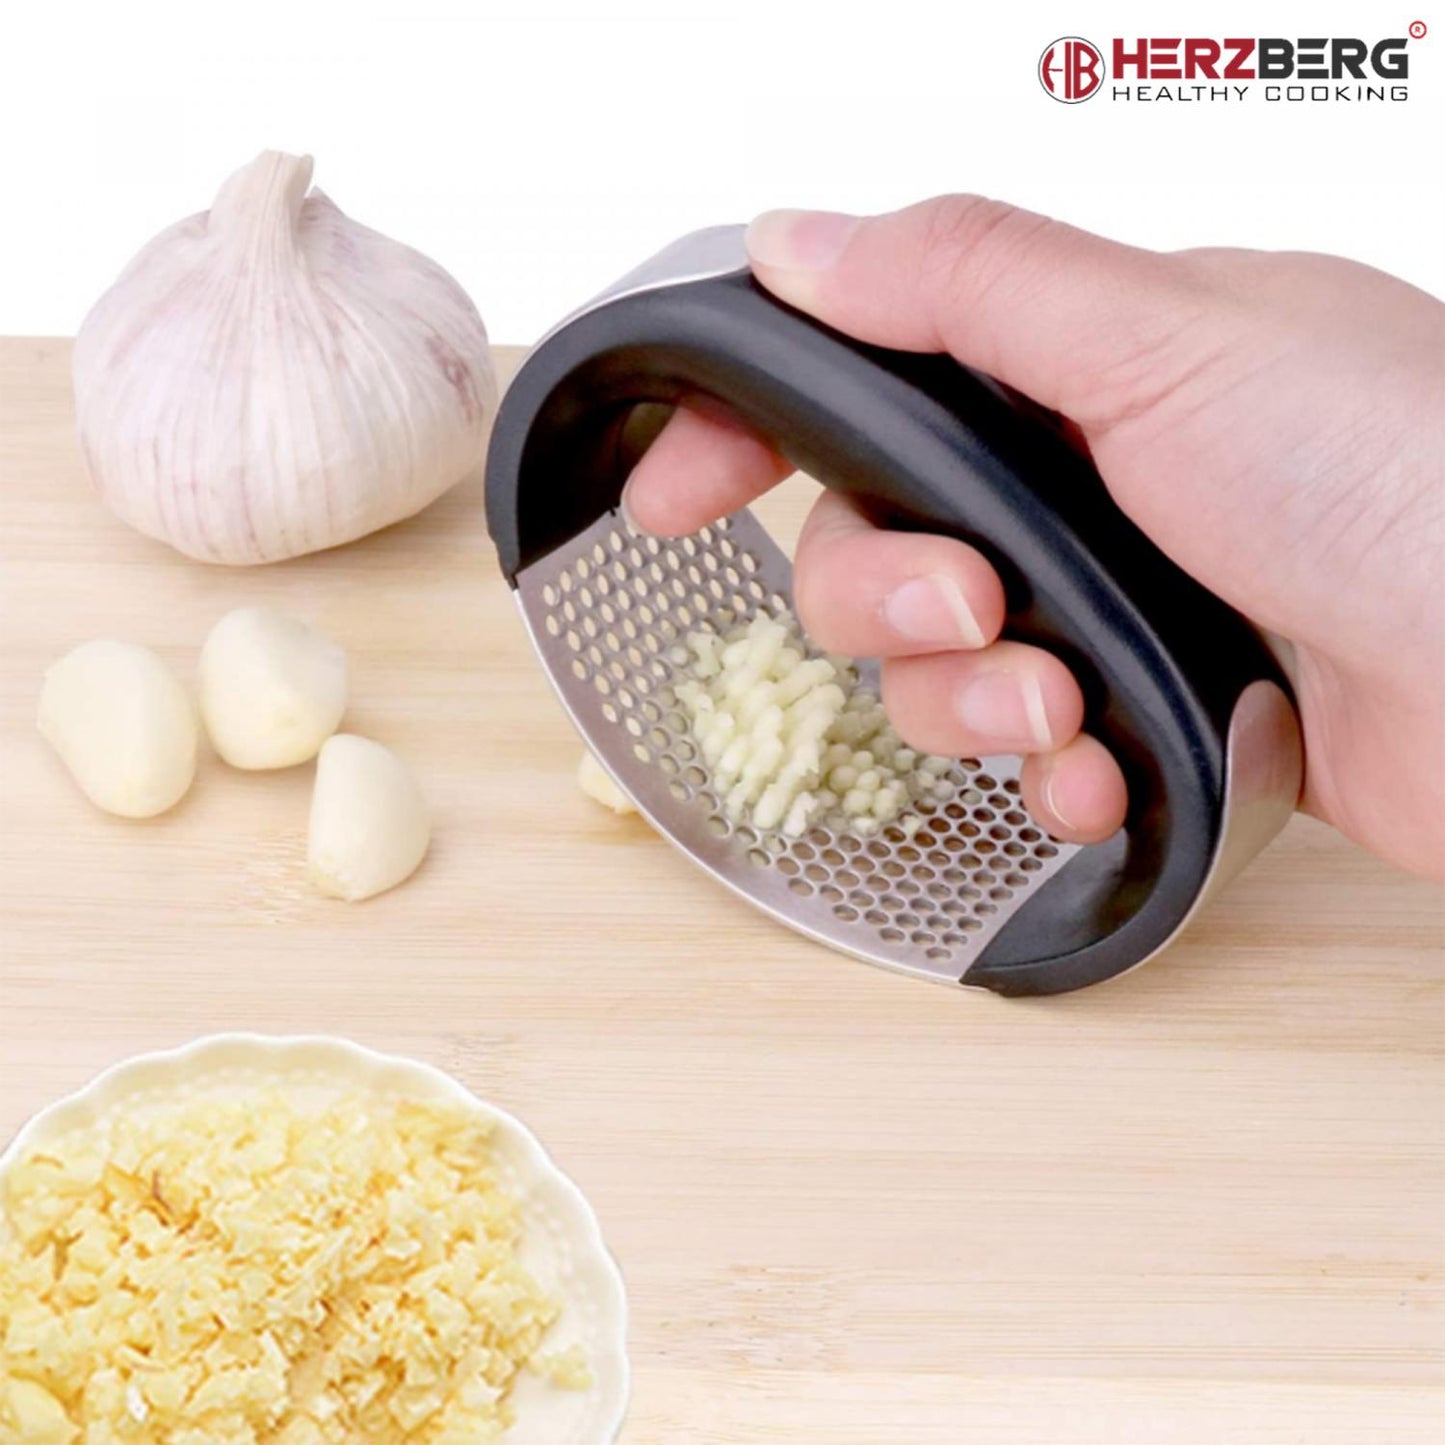 Herzberg 3 in 1 Garlic and Ginger High-Quality Press with Cleaning brush